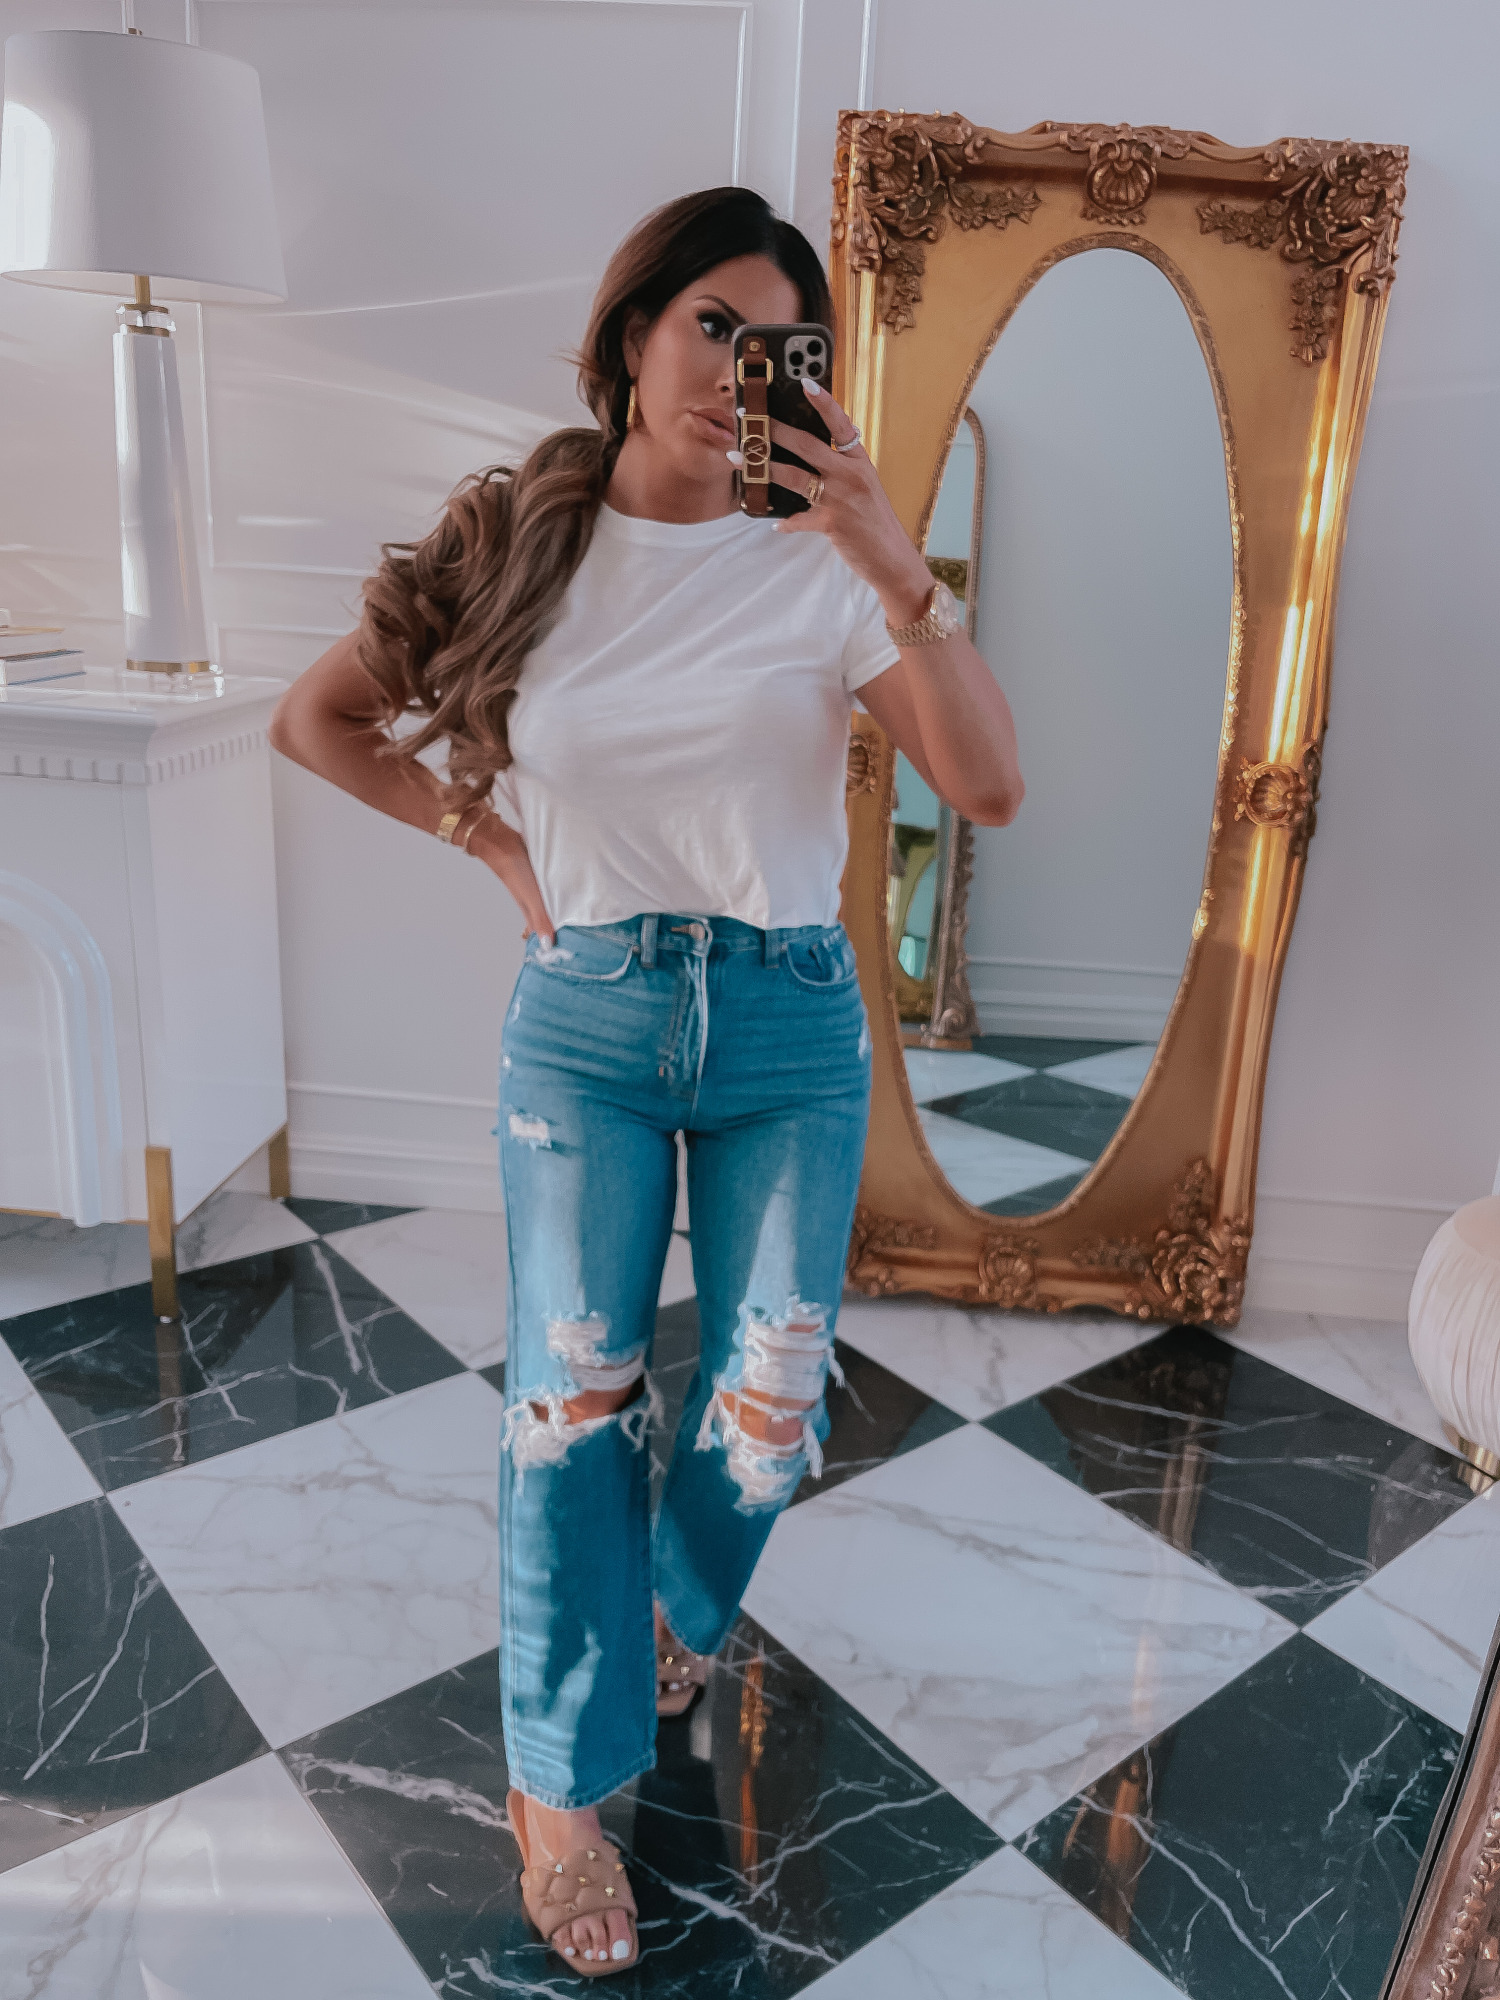 Best Basic White T-Shirt, Ripped Jeans, Spring Outfit Ideas 2021, Nude Sandals, Emily Ann Gemma, Best Closet Basics Spring 2021 |Spring Fashion by popular US fashion blog, The Sweetest Thing: image of Emily Gemma wearing a white t-shirt, distressed denim and tan studded slide sandals. 